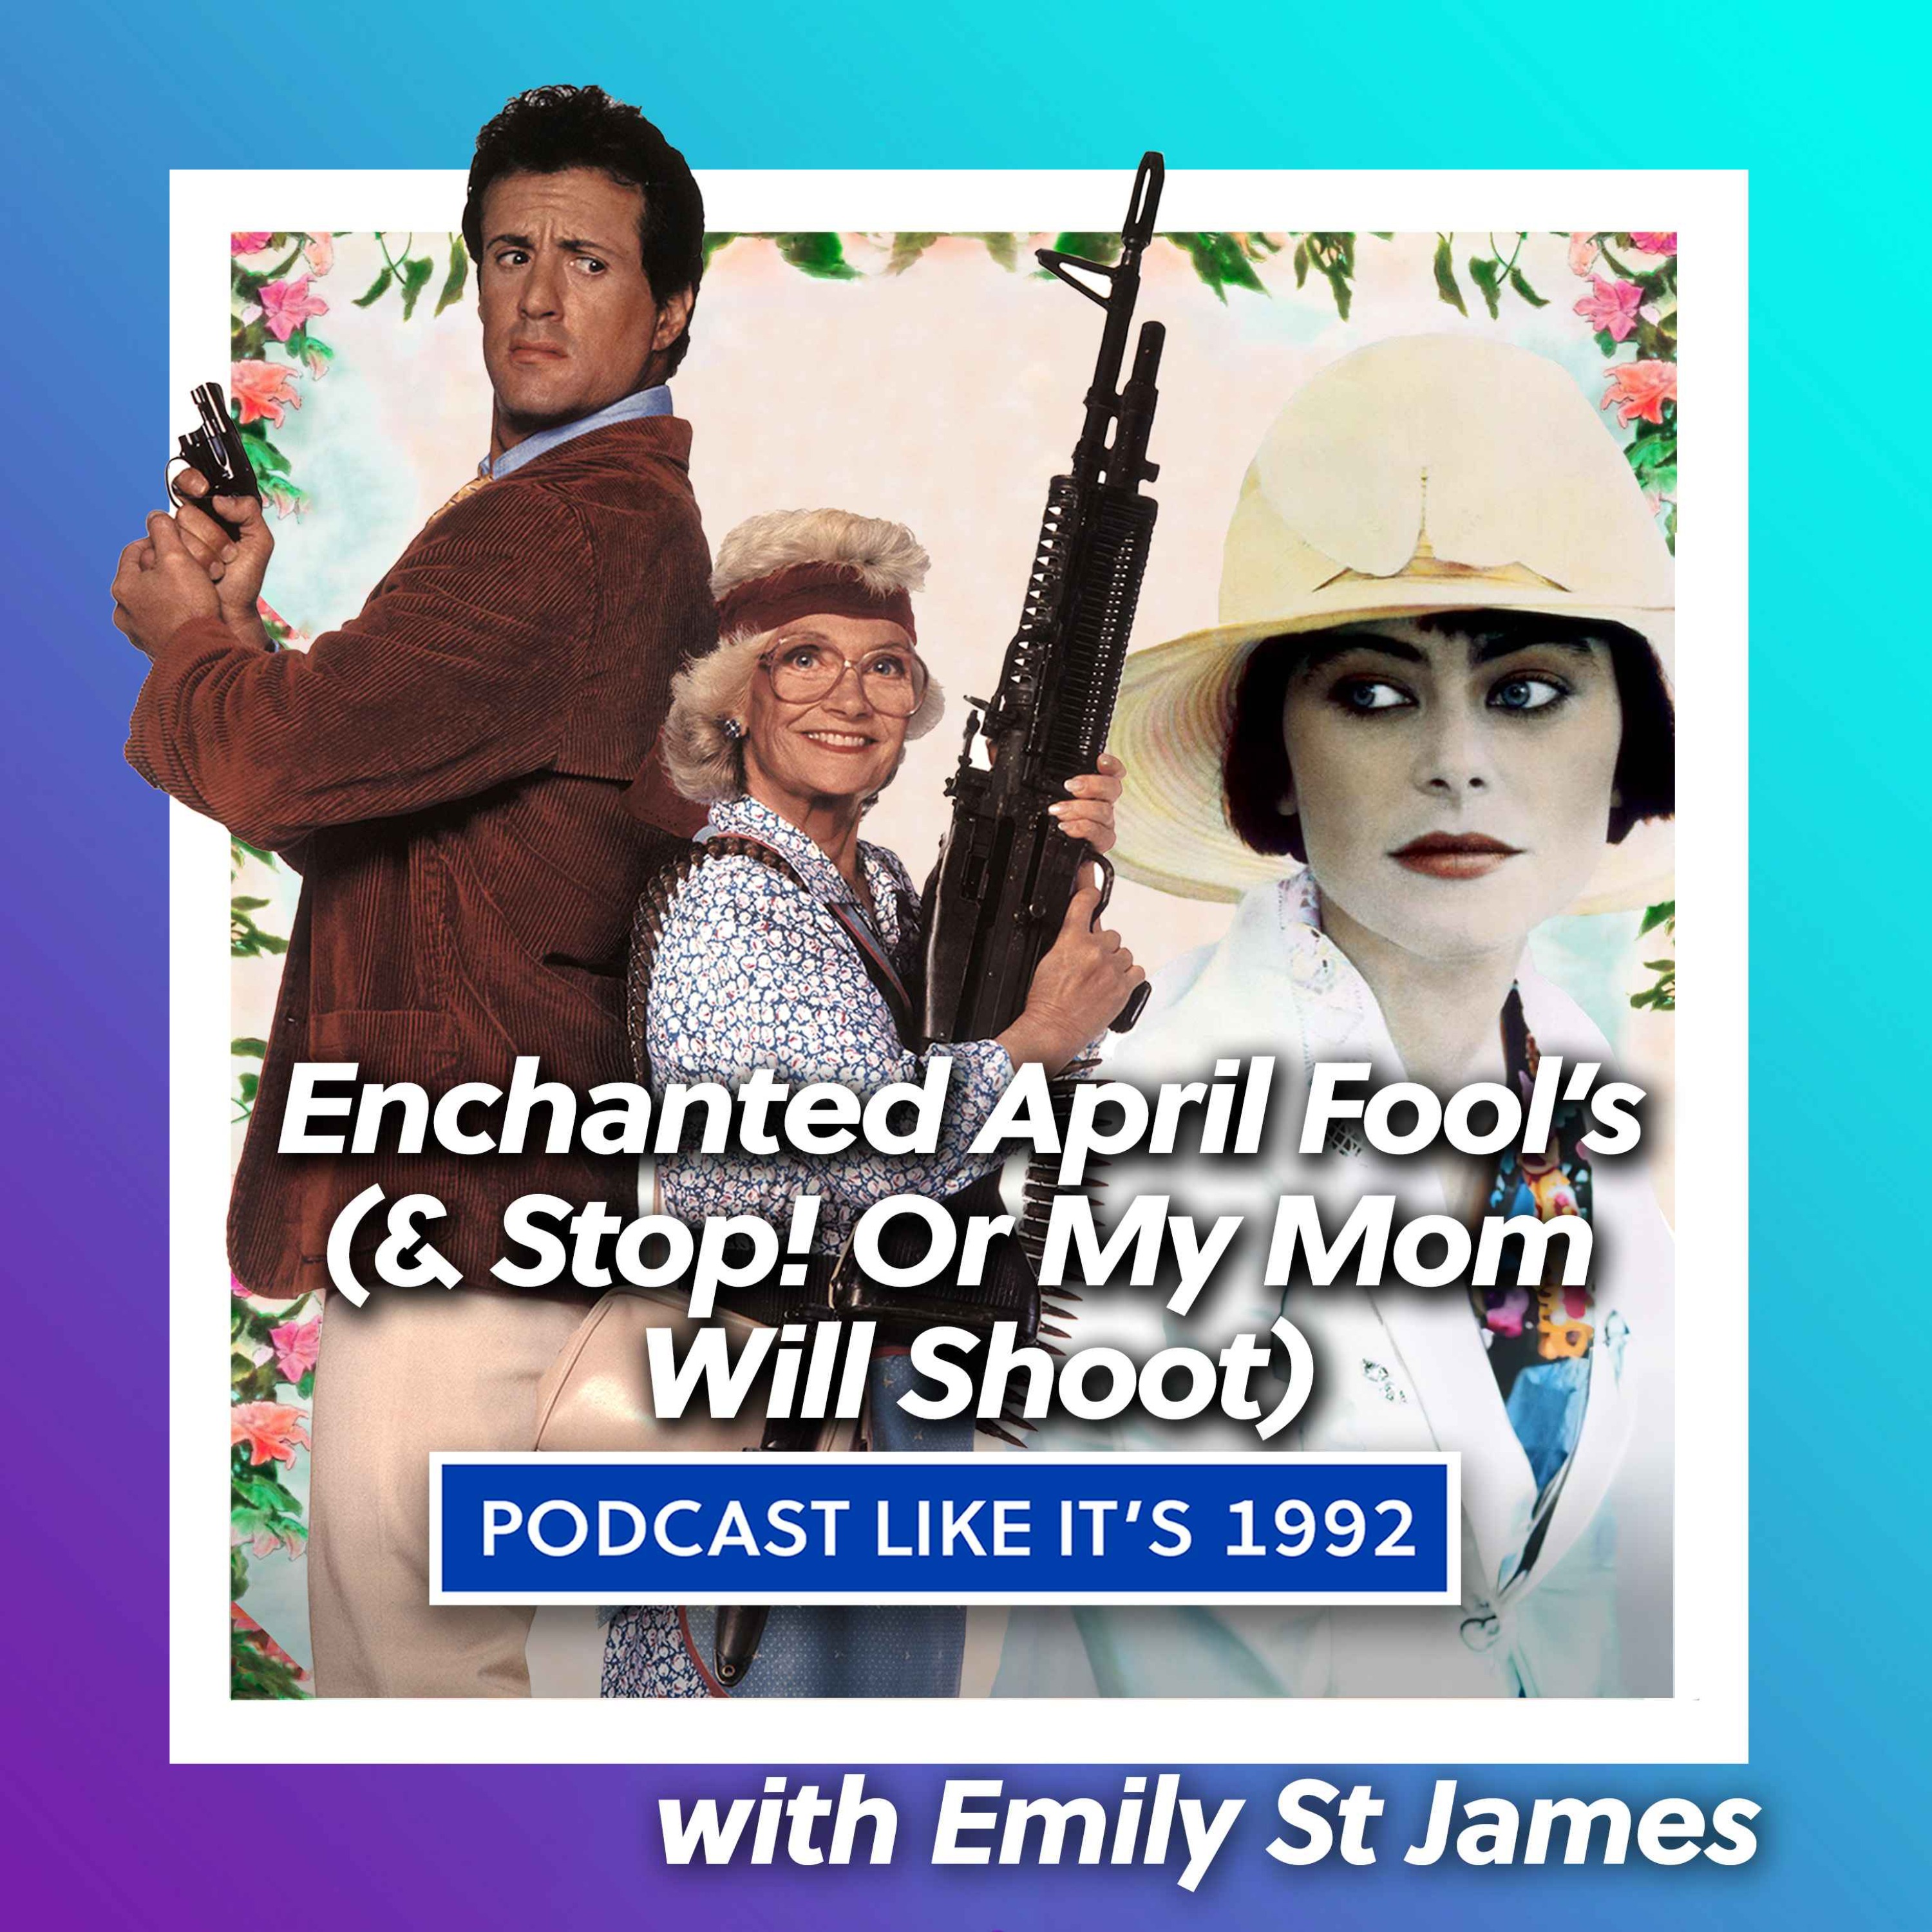 Bonus: Enchanted April Fool’s (& Stop! Or My Mom Will Shoot) with Emily